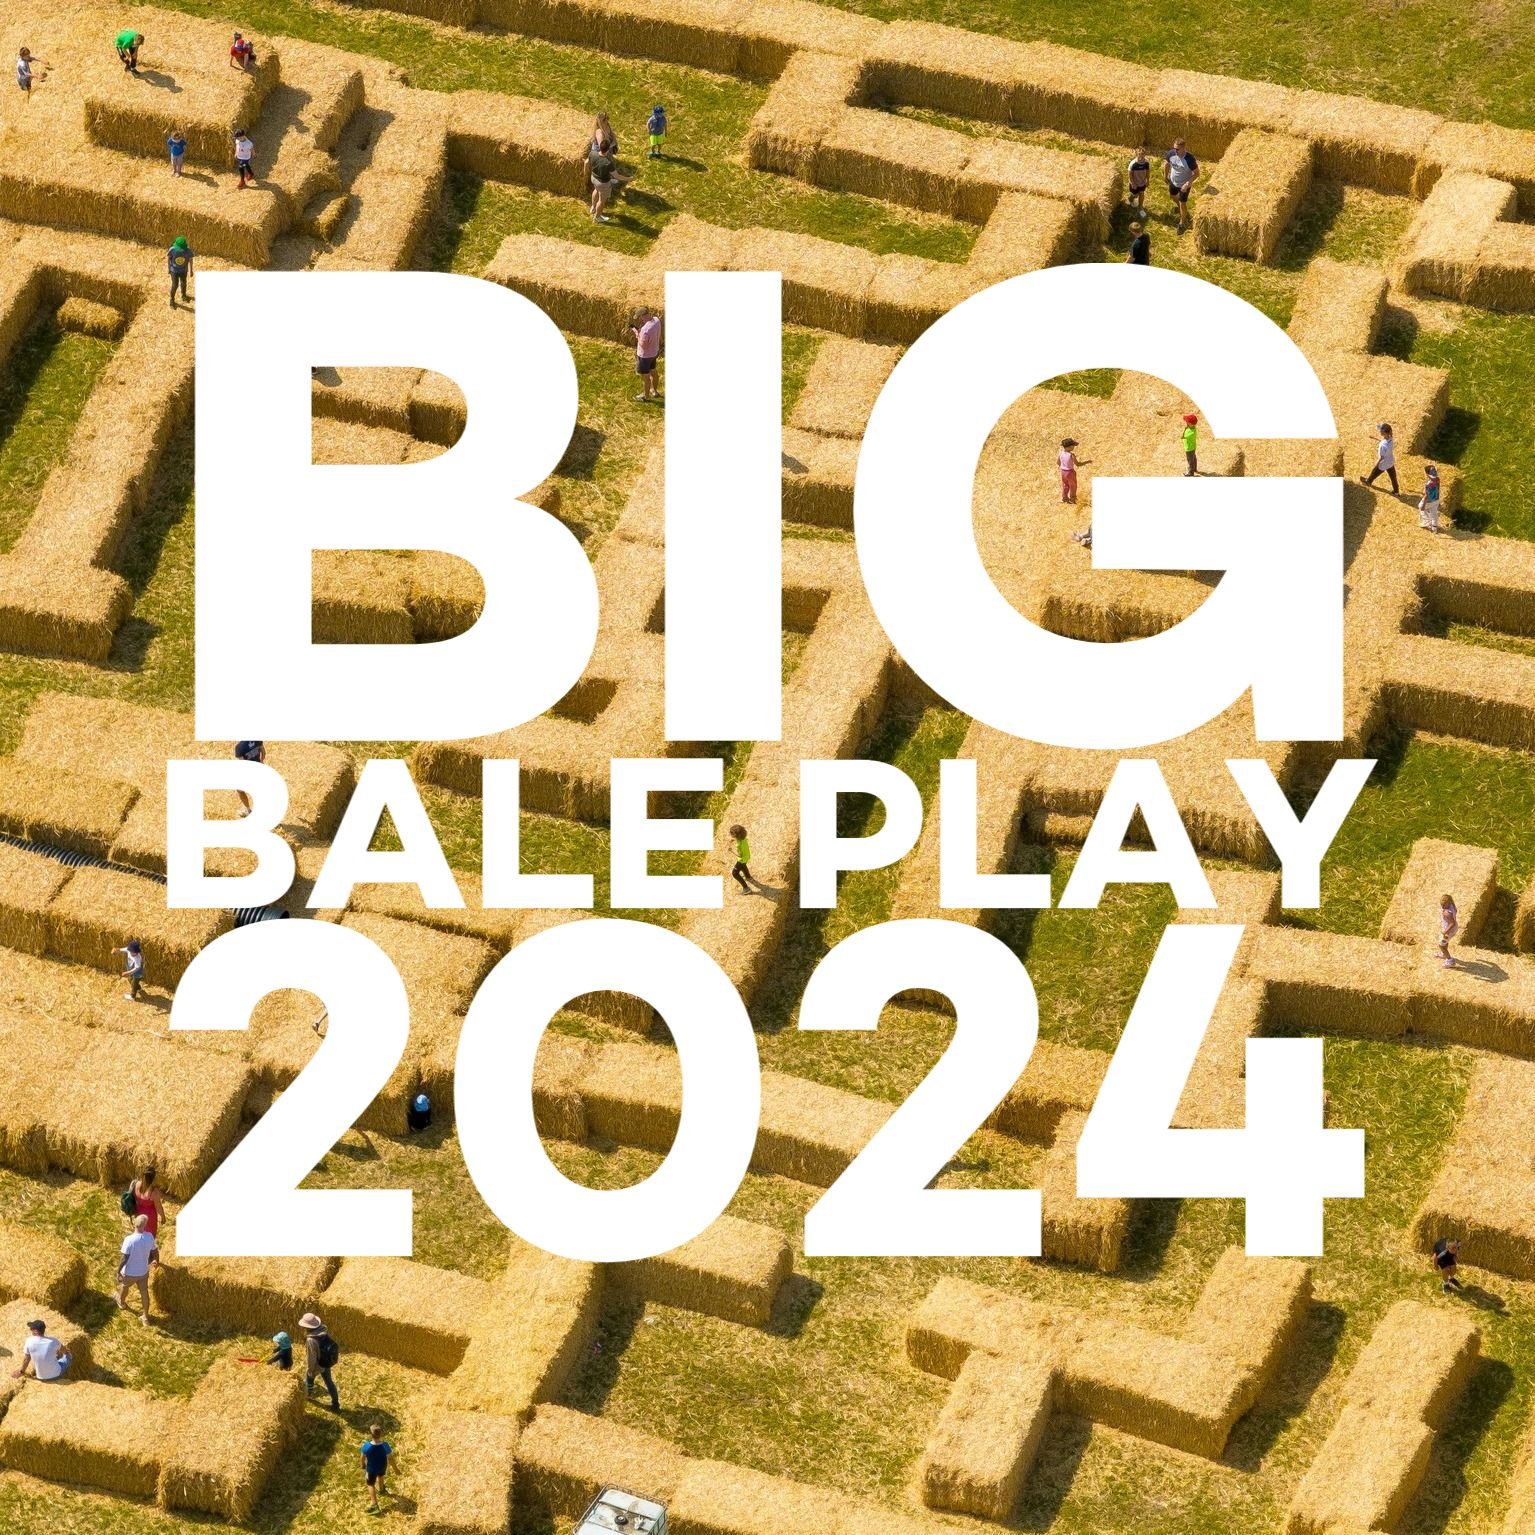 🌾 BIG BALE PLAY IS BACK FOR MAY HALF TERM - TICKETS ON SALE NOW 🌾

We're opening our gates for just NINE DAYS for our second BIG BALE PLAY event which is back by popular demand from Saturday, May 25th! 

We are packing our big grass field with even